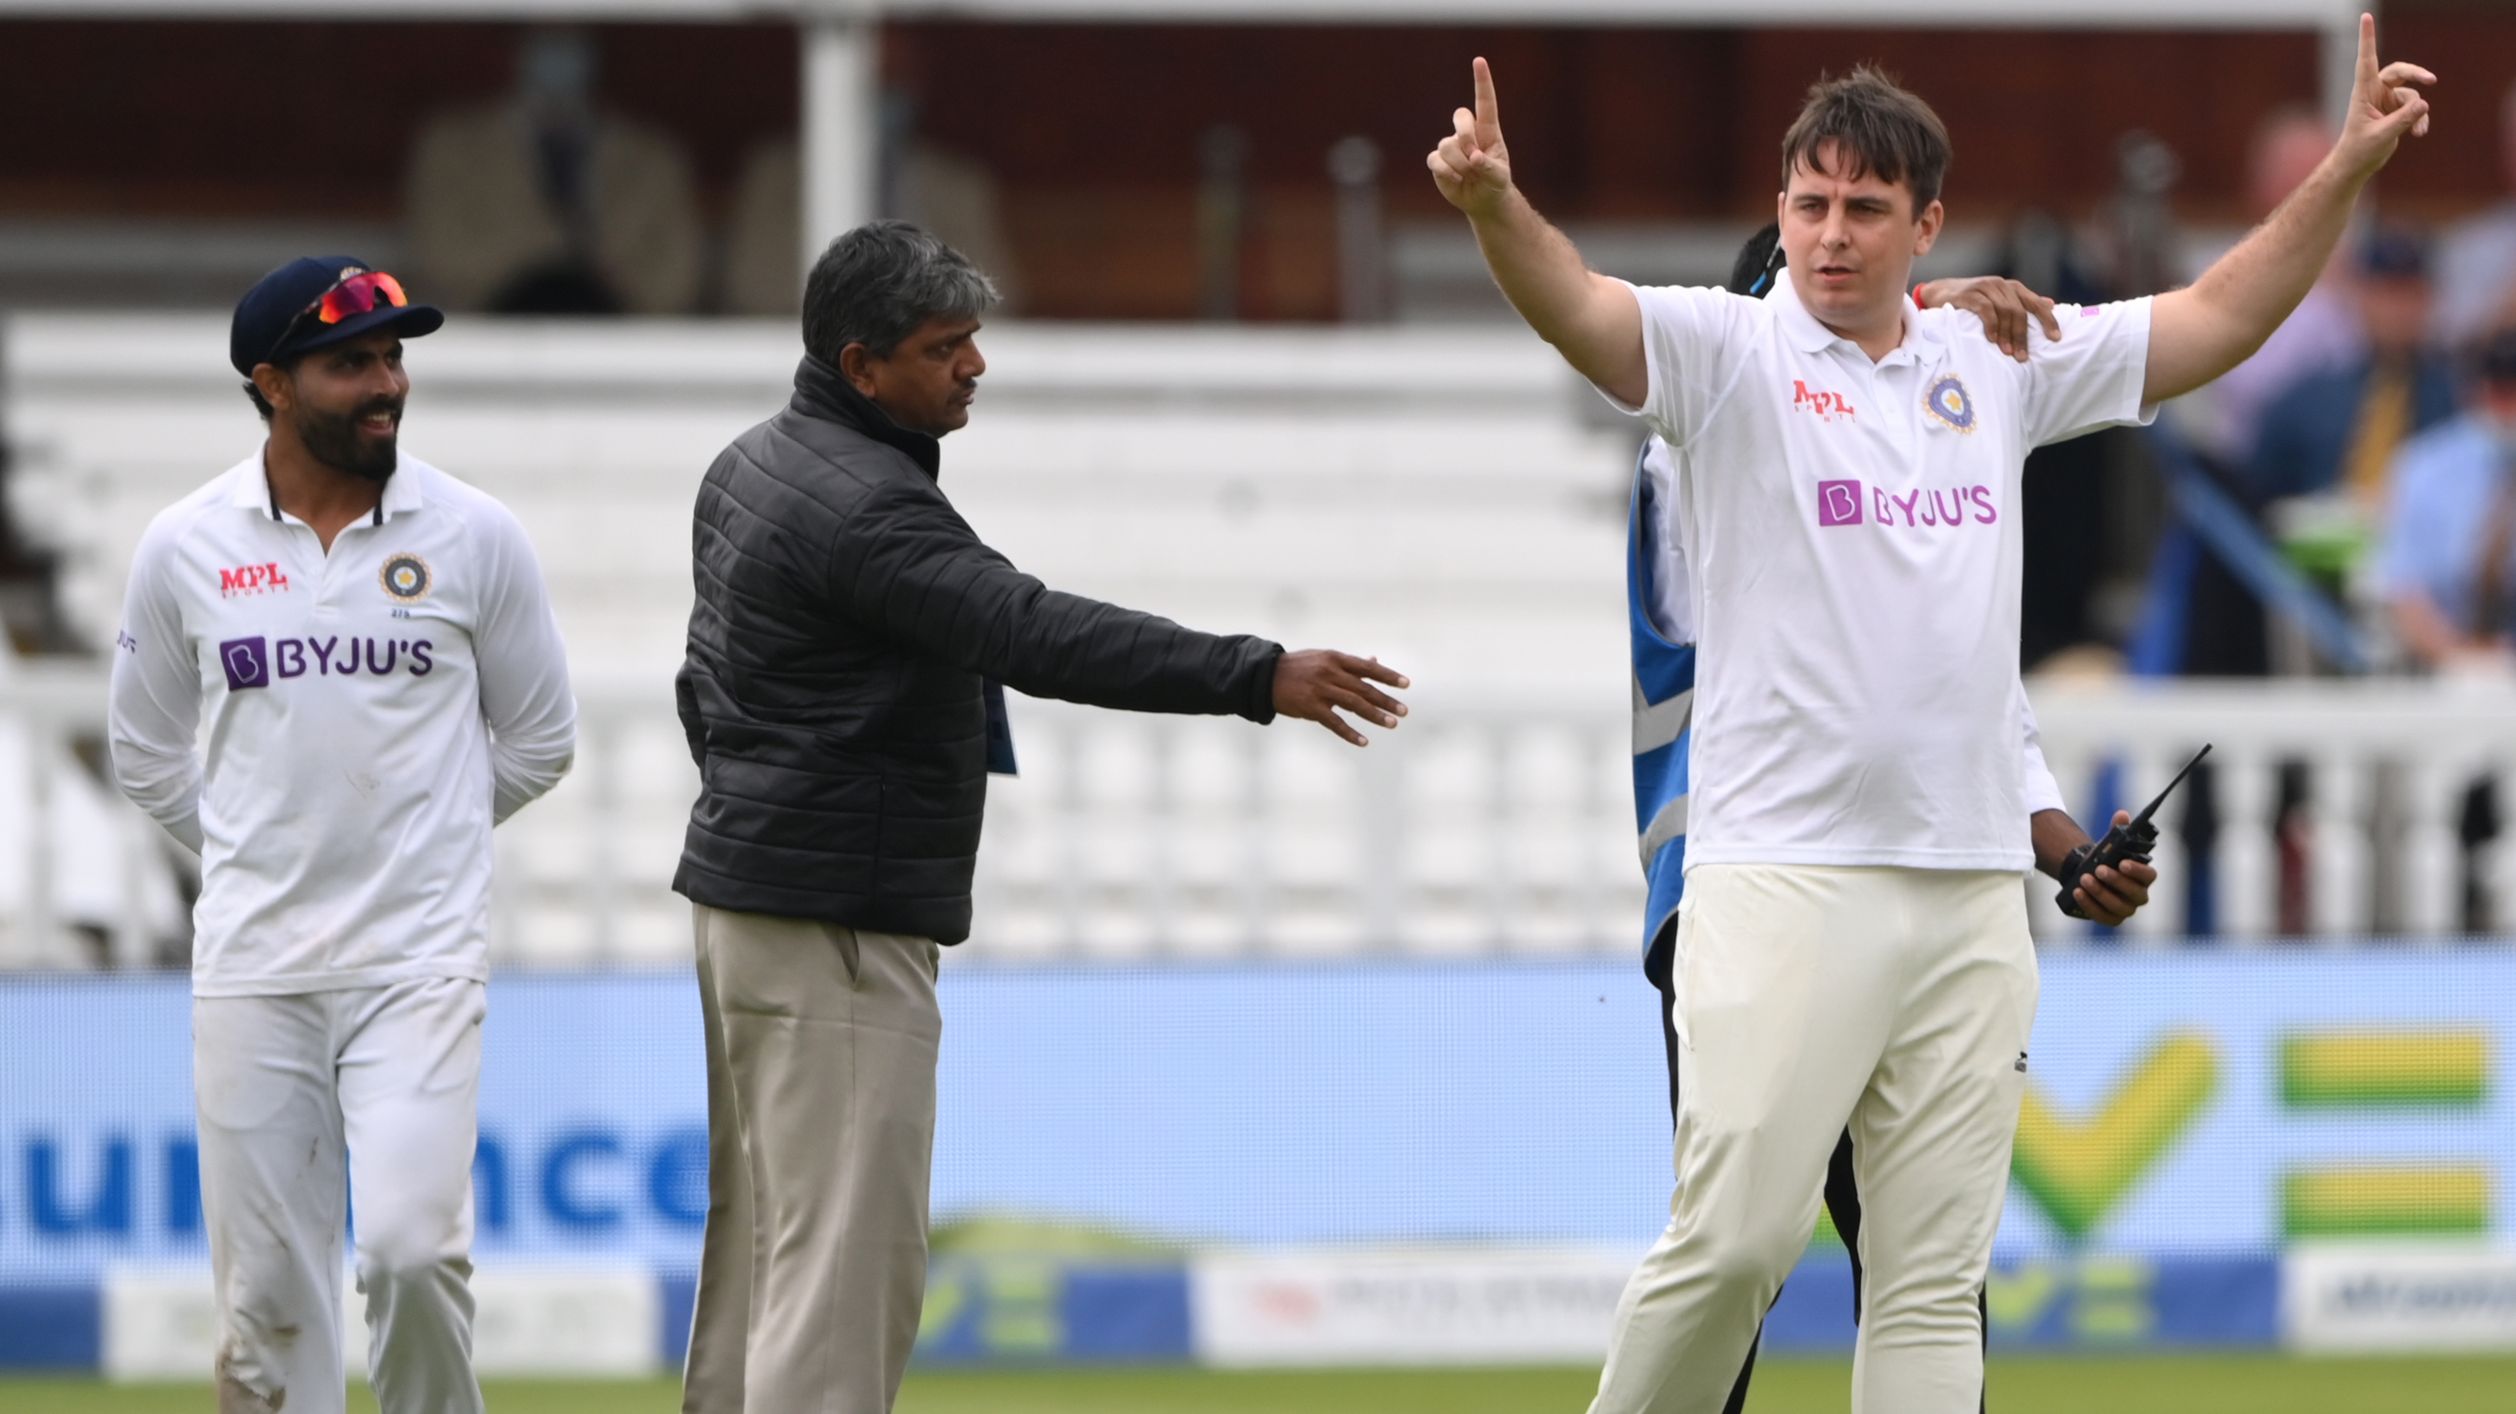 Lord's pitch invader leaves India in stitches